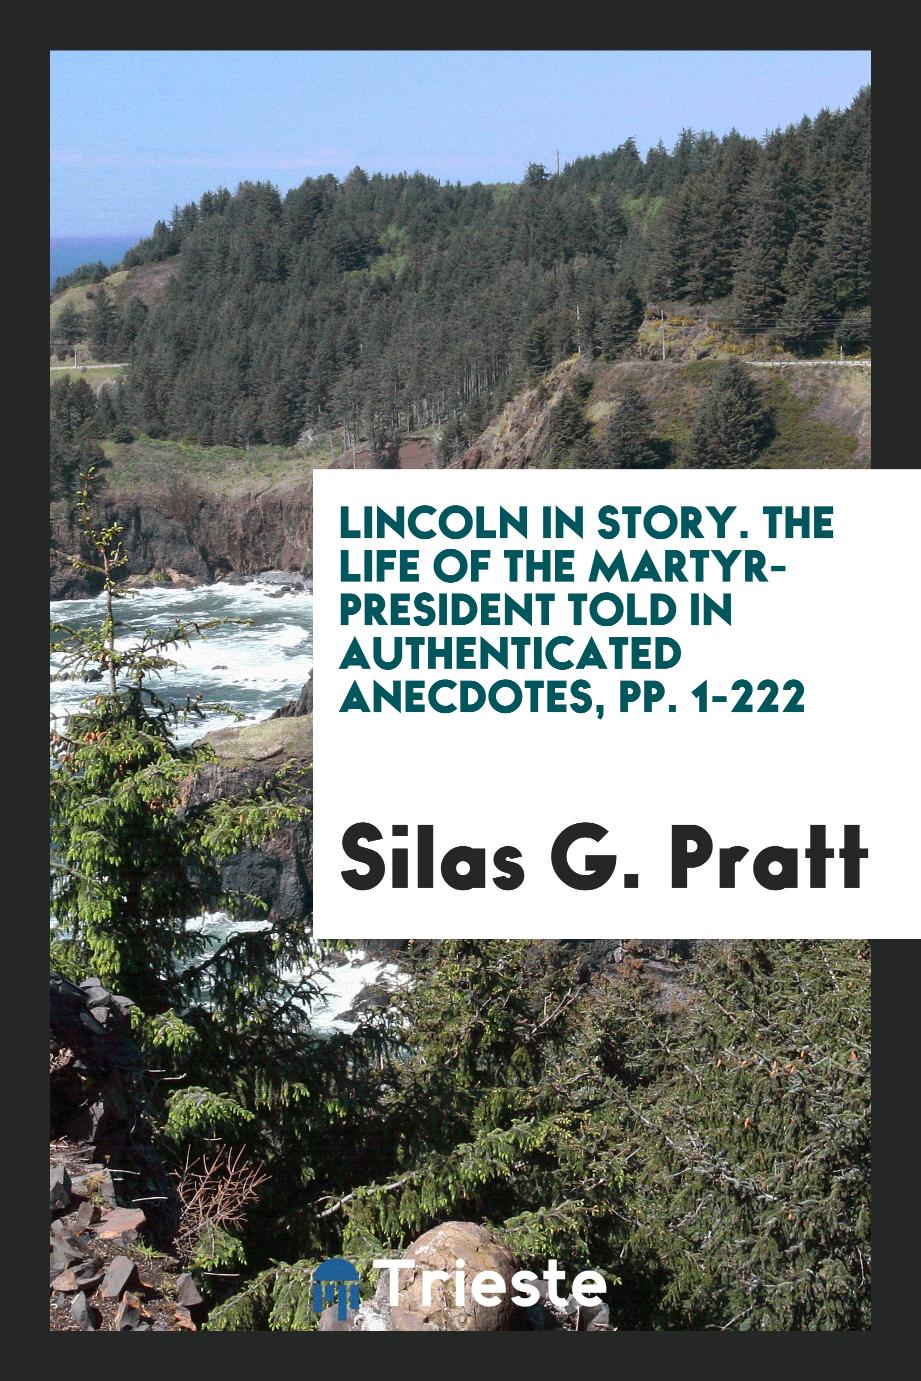 Lincoln in Story. The Life of the Martyr-President Told in Authenticated Anecdotes, pp. 1-222